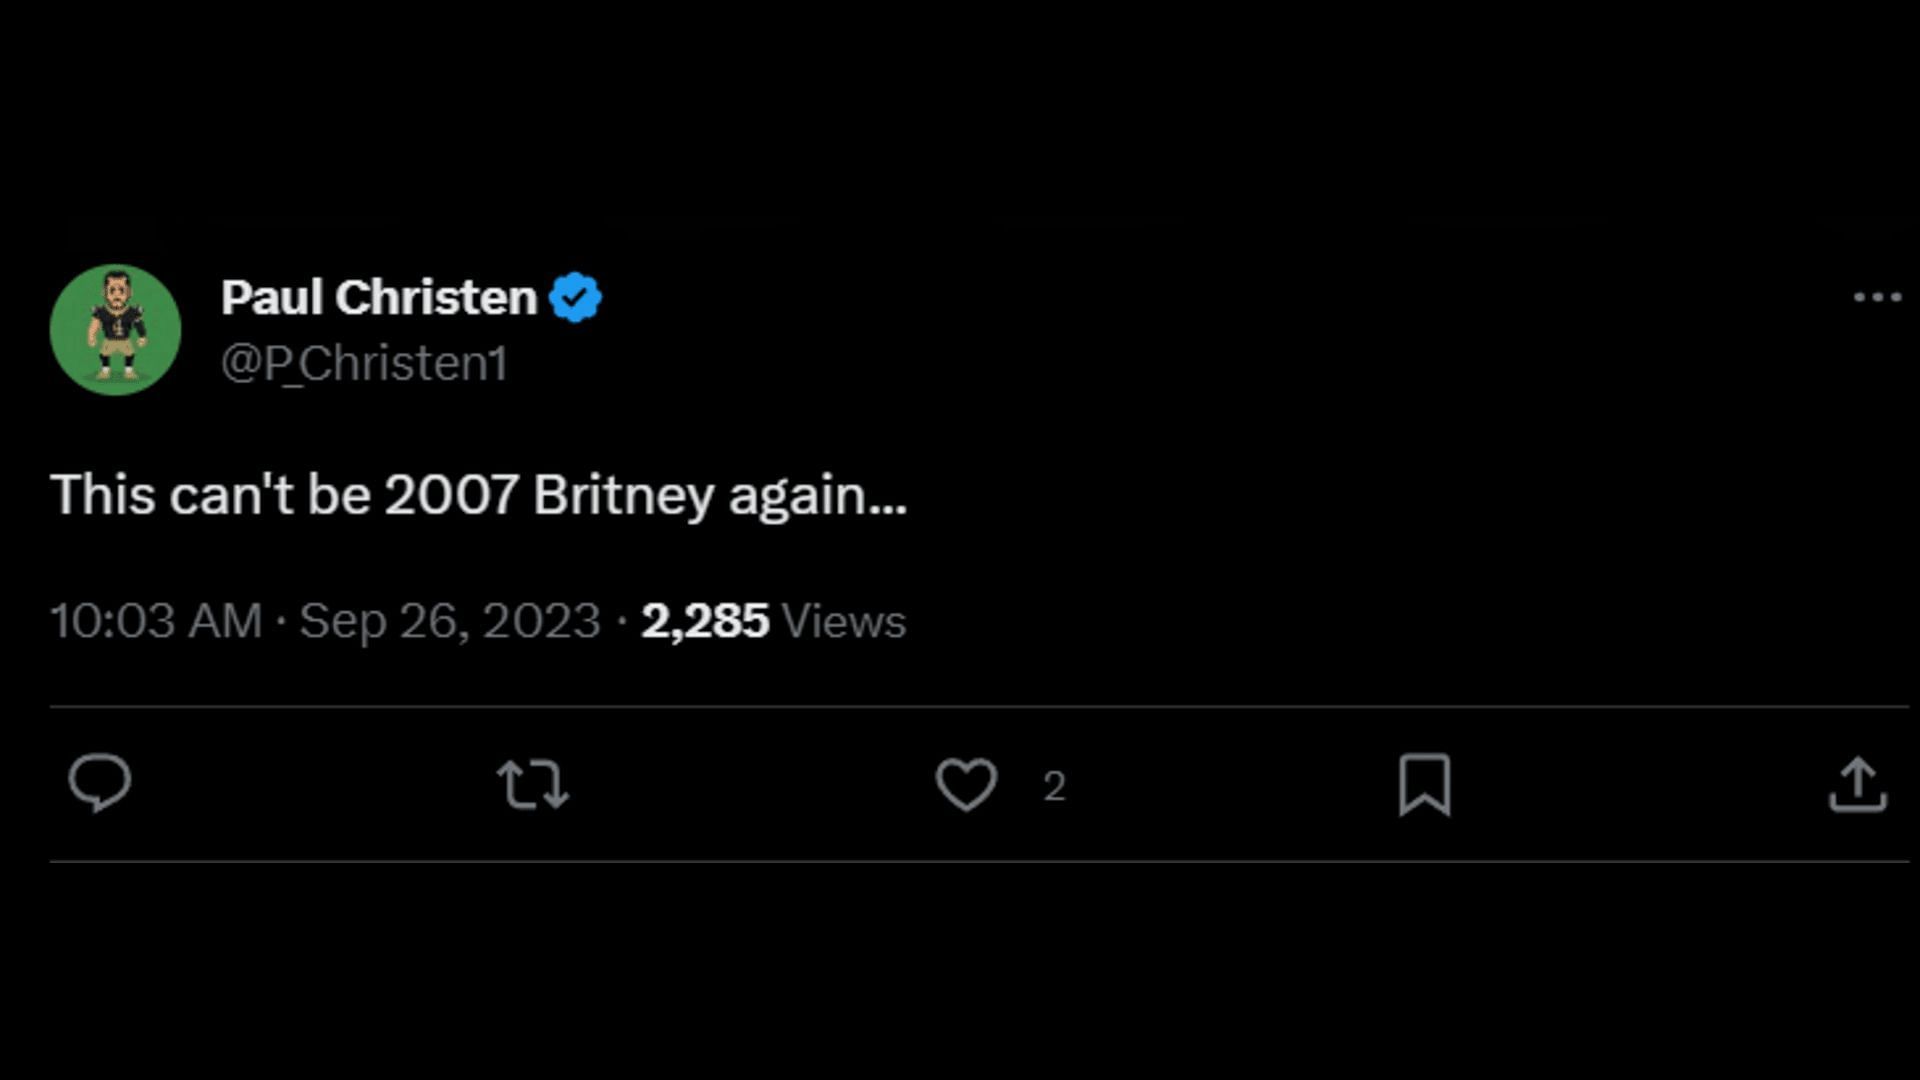 A netizen says Britney Spears is behaving like in the past when she was harmful to herself and others. (Image via X/Paul Christen)